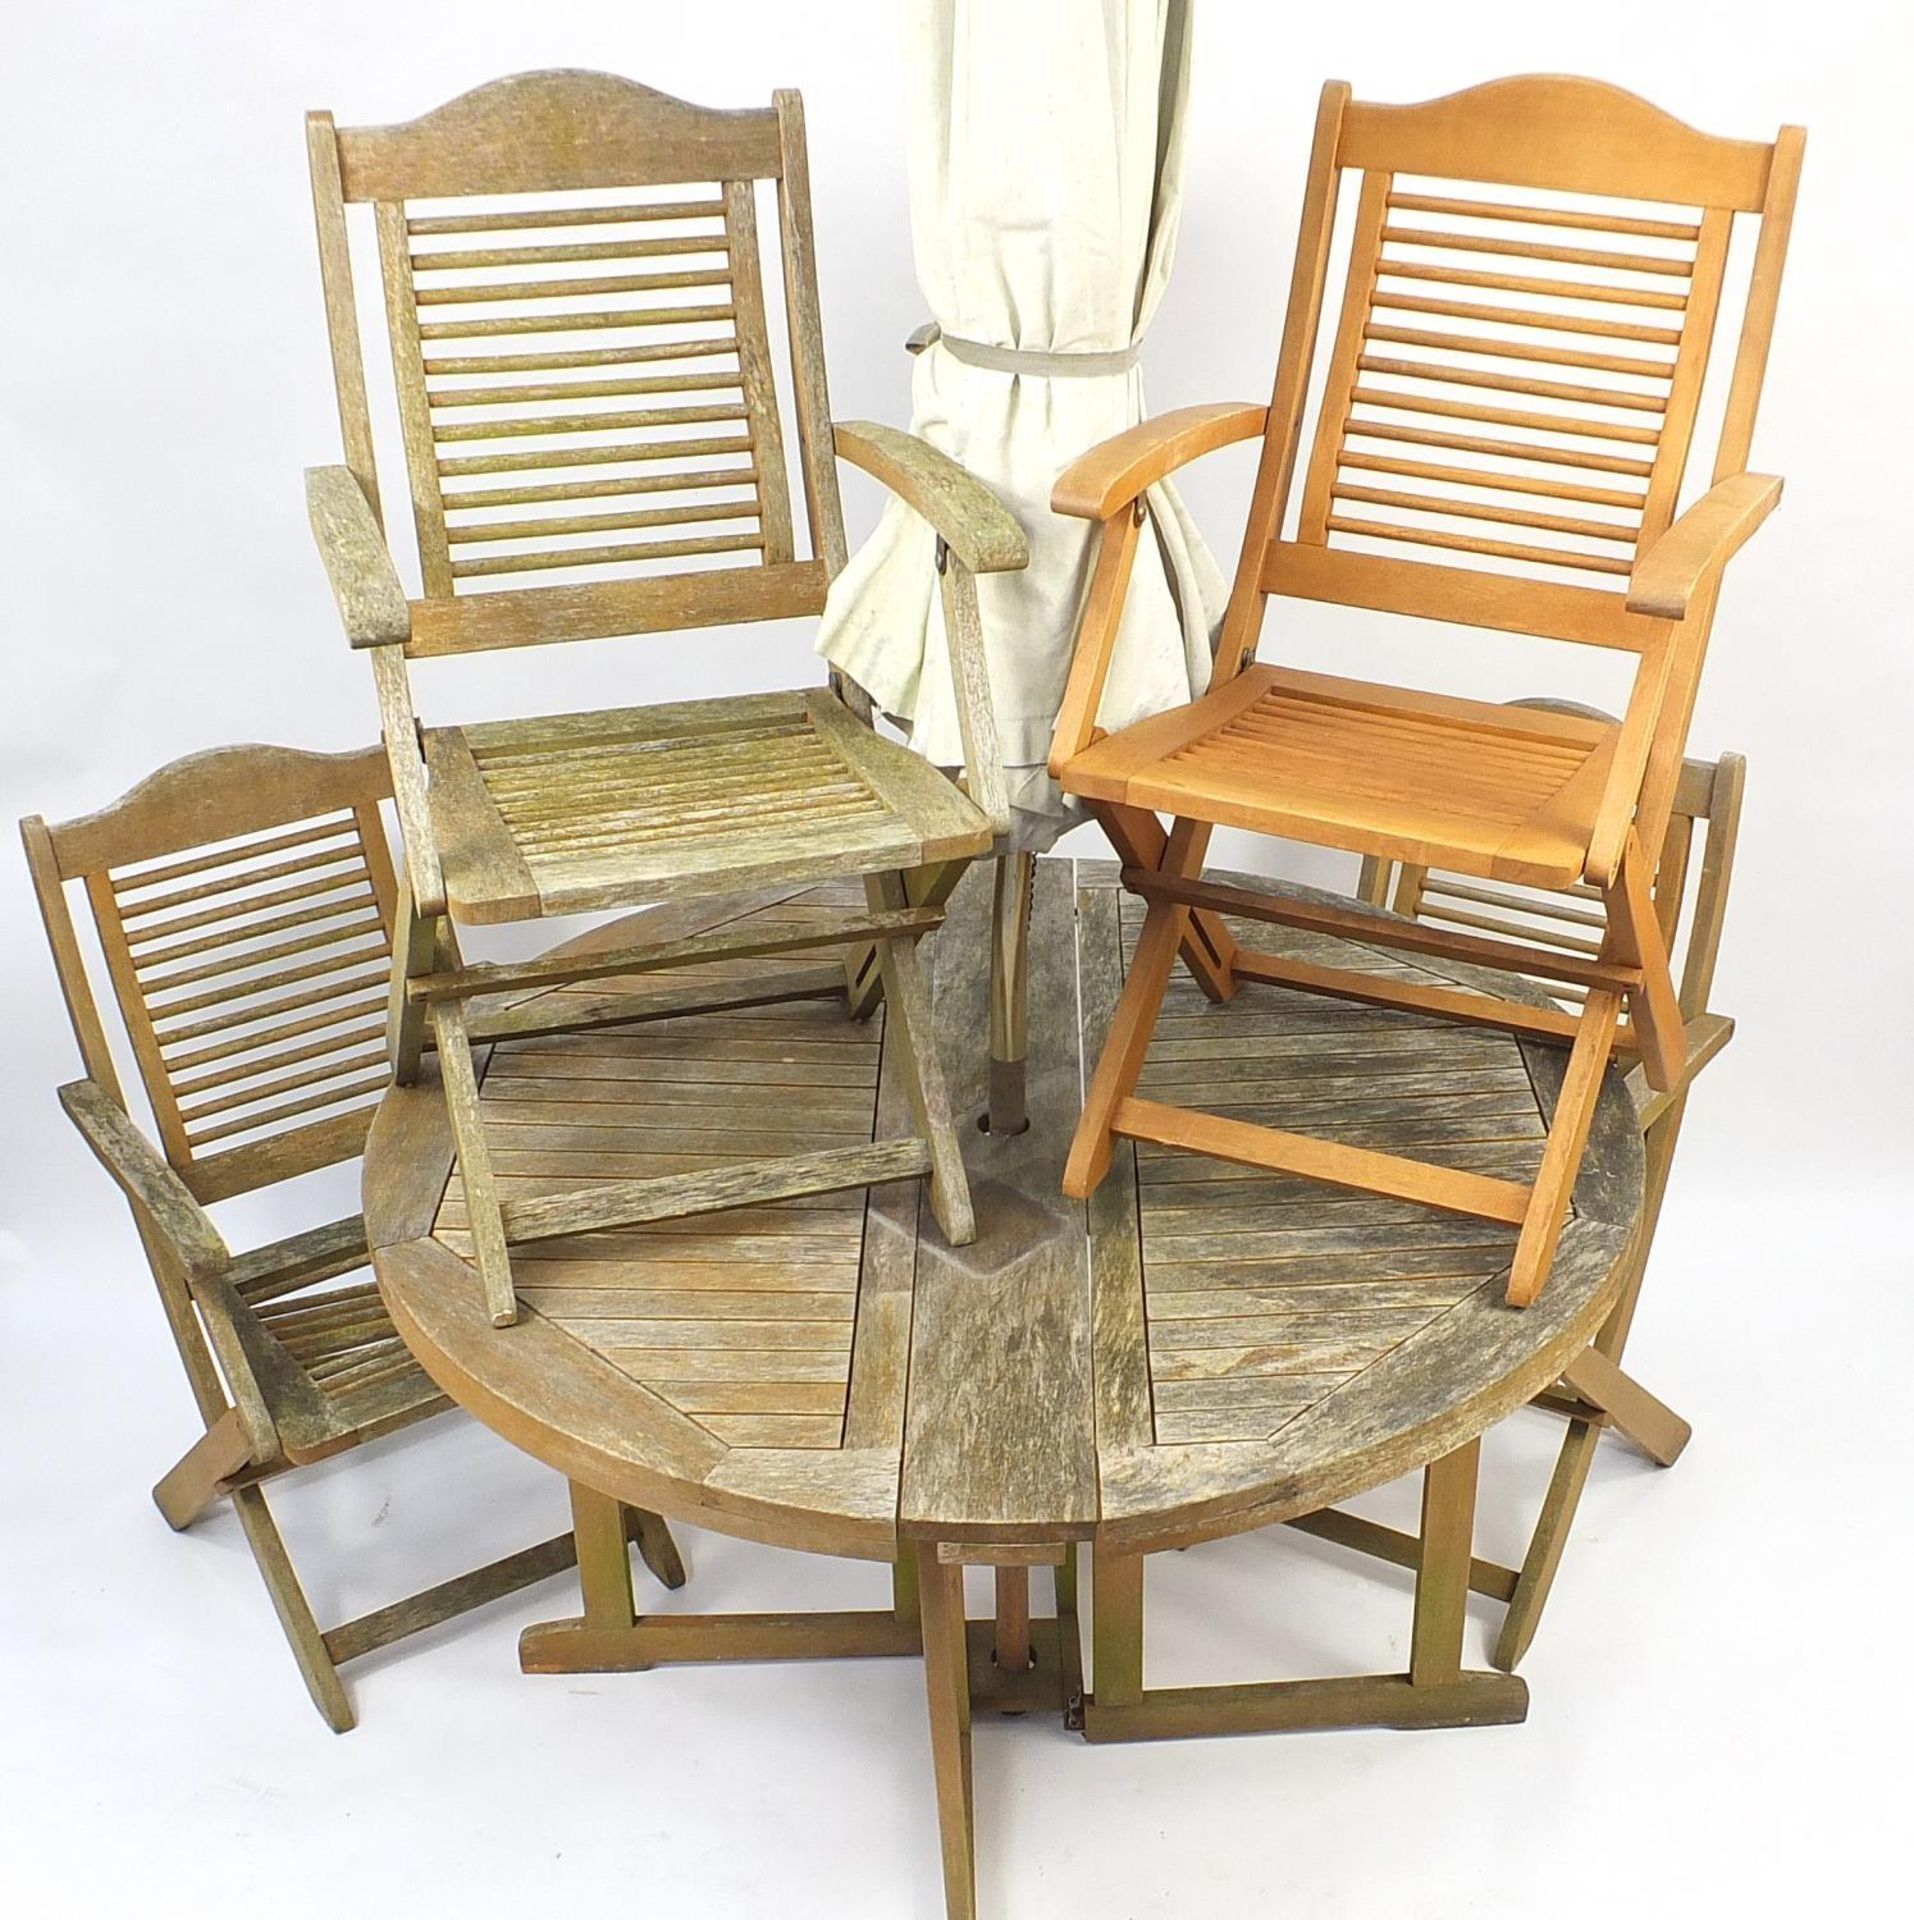 Teak folding garden table with parasol and four chairs - Image 2 of 2